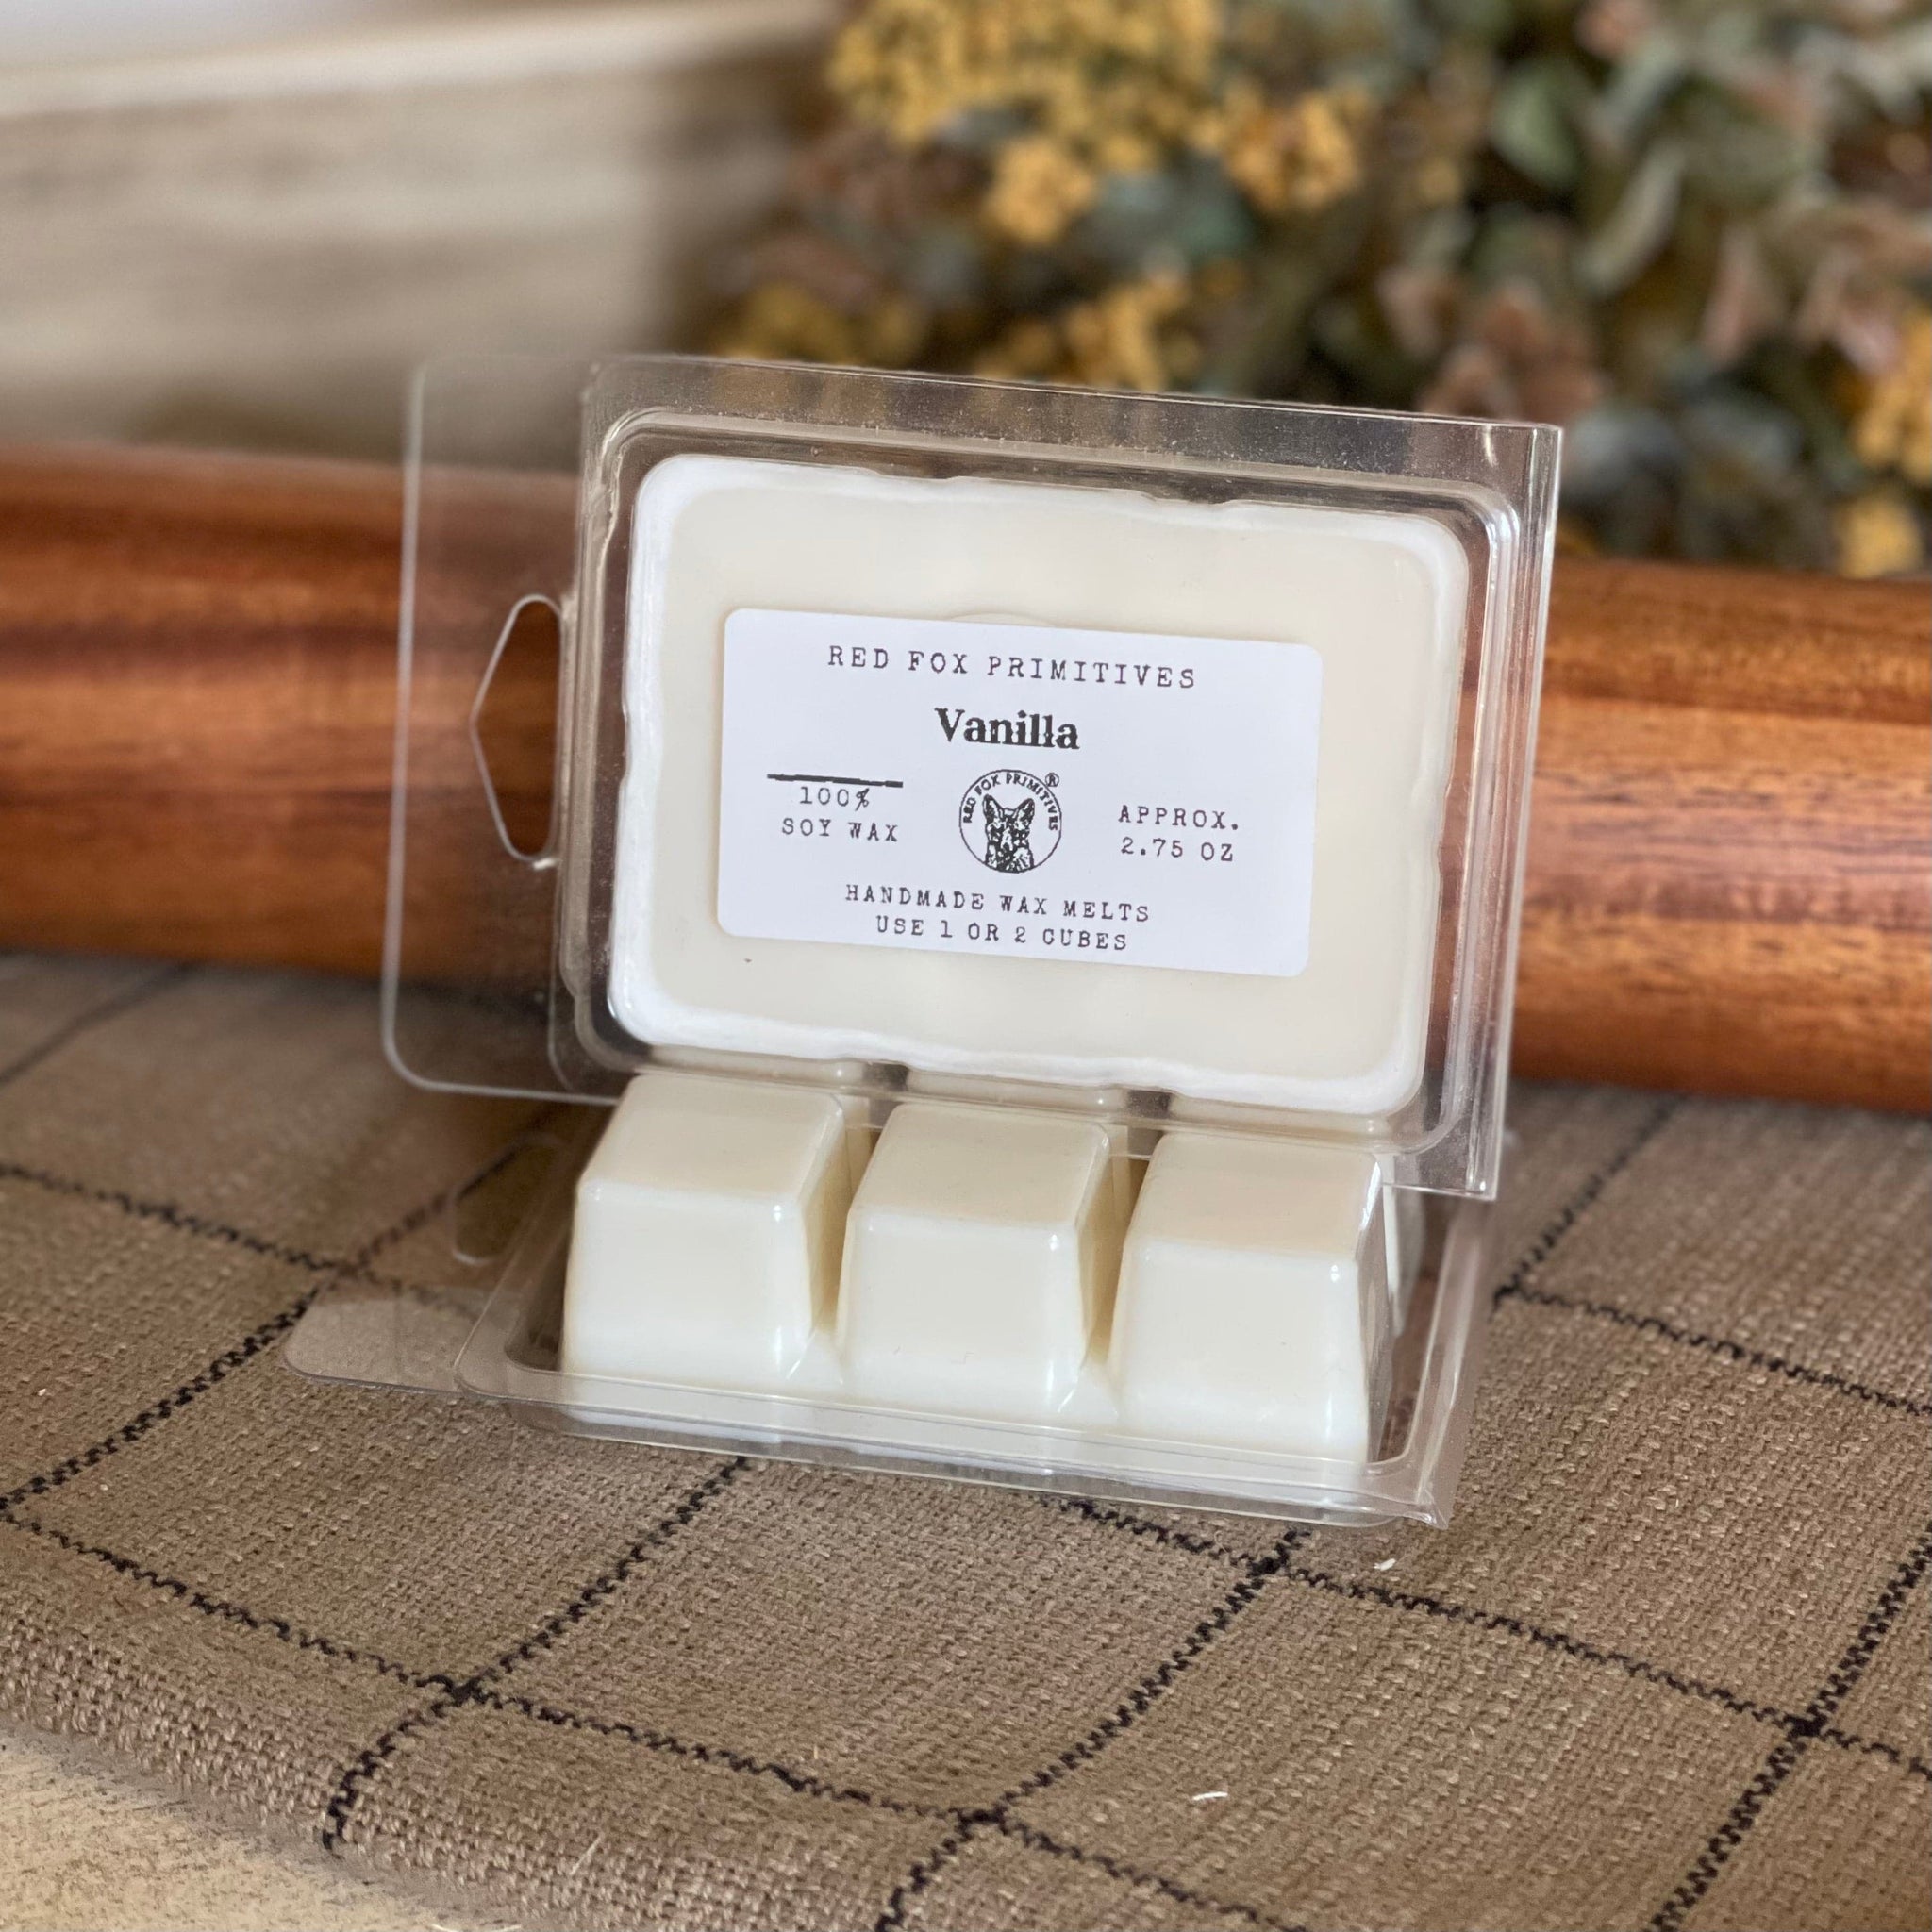 Vanilla - Soy Melt Set of 2 Best Scented Wax Melts, Candles, Fall Scents, For Sale, New, Primitive Candles, Vanilla Wax Melts, Wax Melts Vanilla - Soy Melt Set of 2 Best Scented Wax Melts, Candles, Fall Scents, For Sale, New, Primitive Candles, Vanilla Wax Melts, Wax Melts Vanilla - Soy Melt Set of 2 Best Scented Wax Melts, Candles, Fall Scents, For Sale, New, Primitive Candles, Vanilla Wax Melts, Wax Melts 